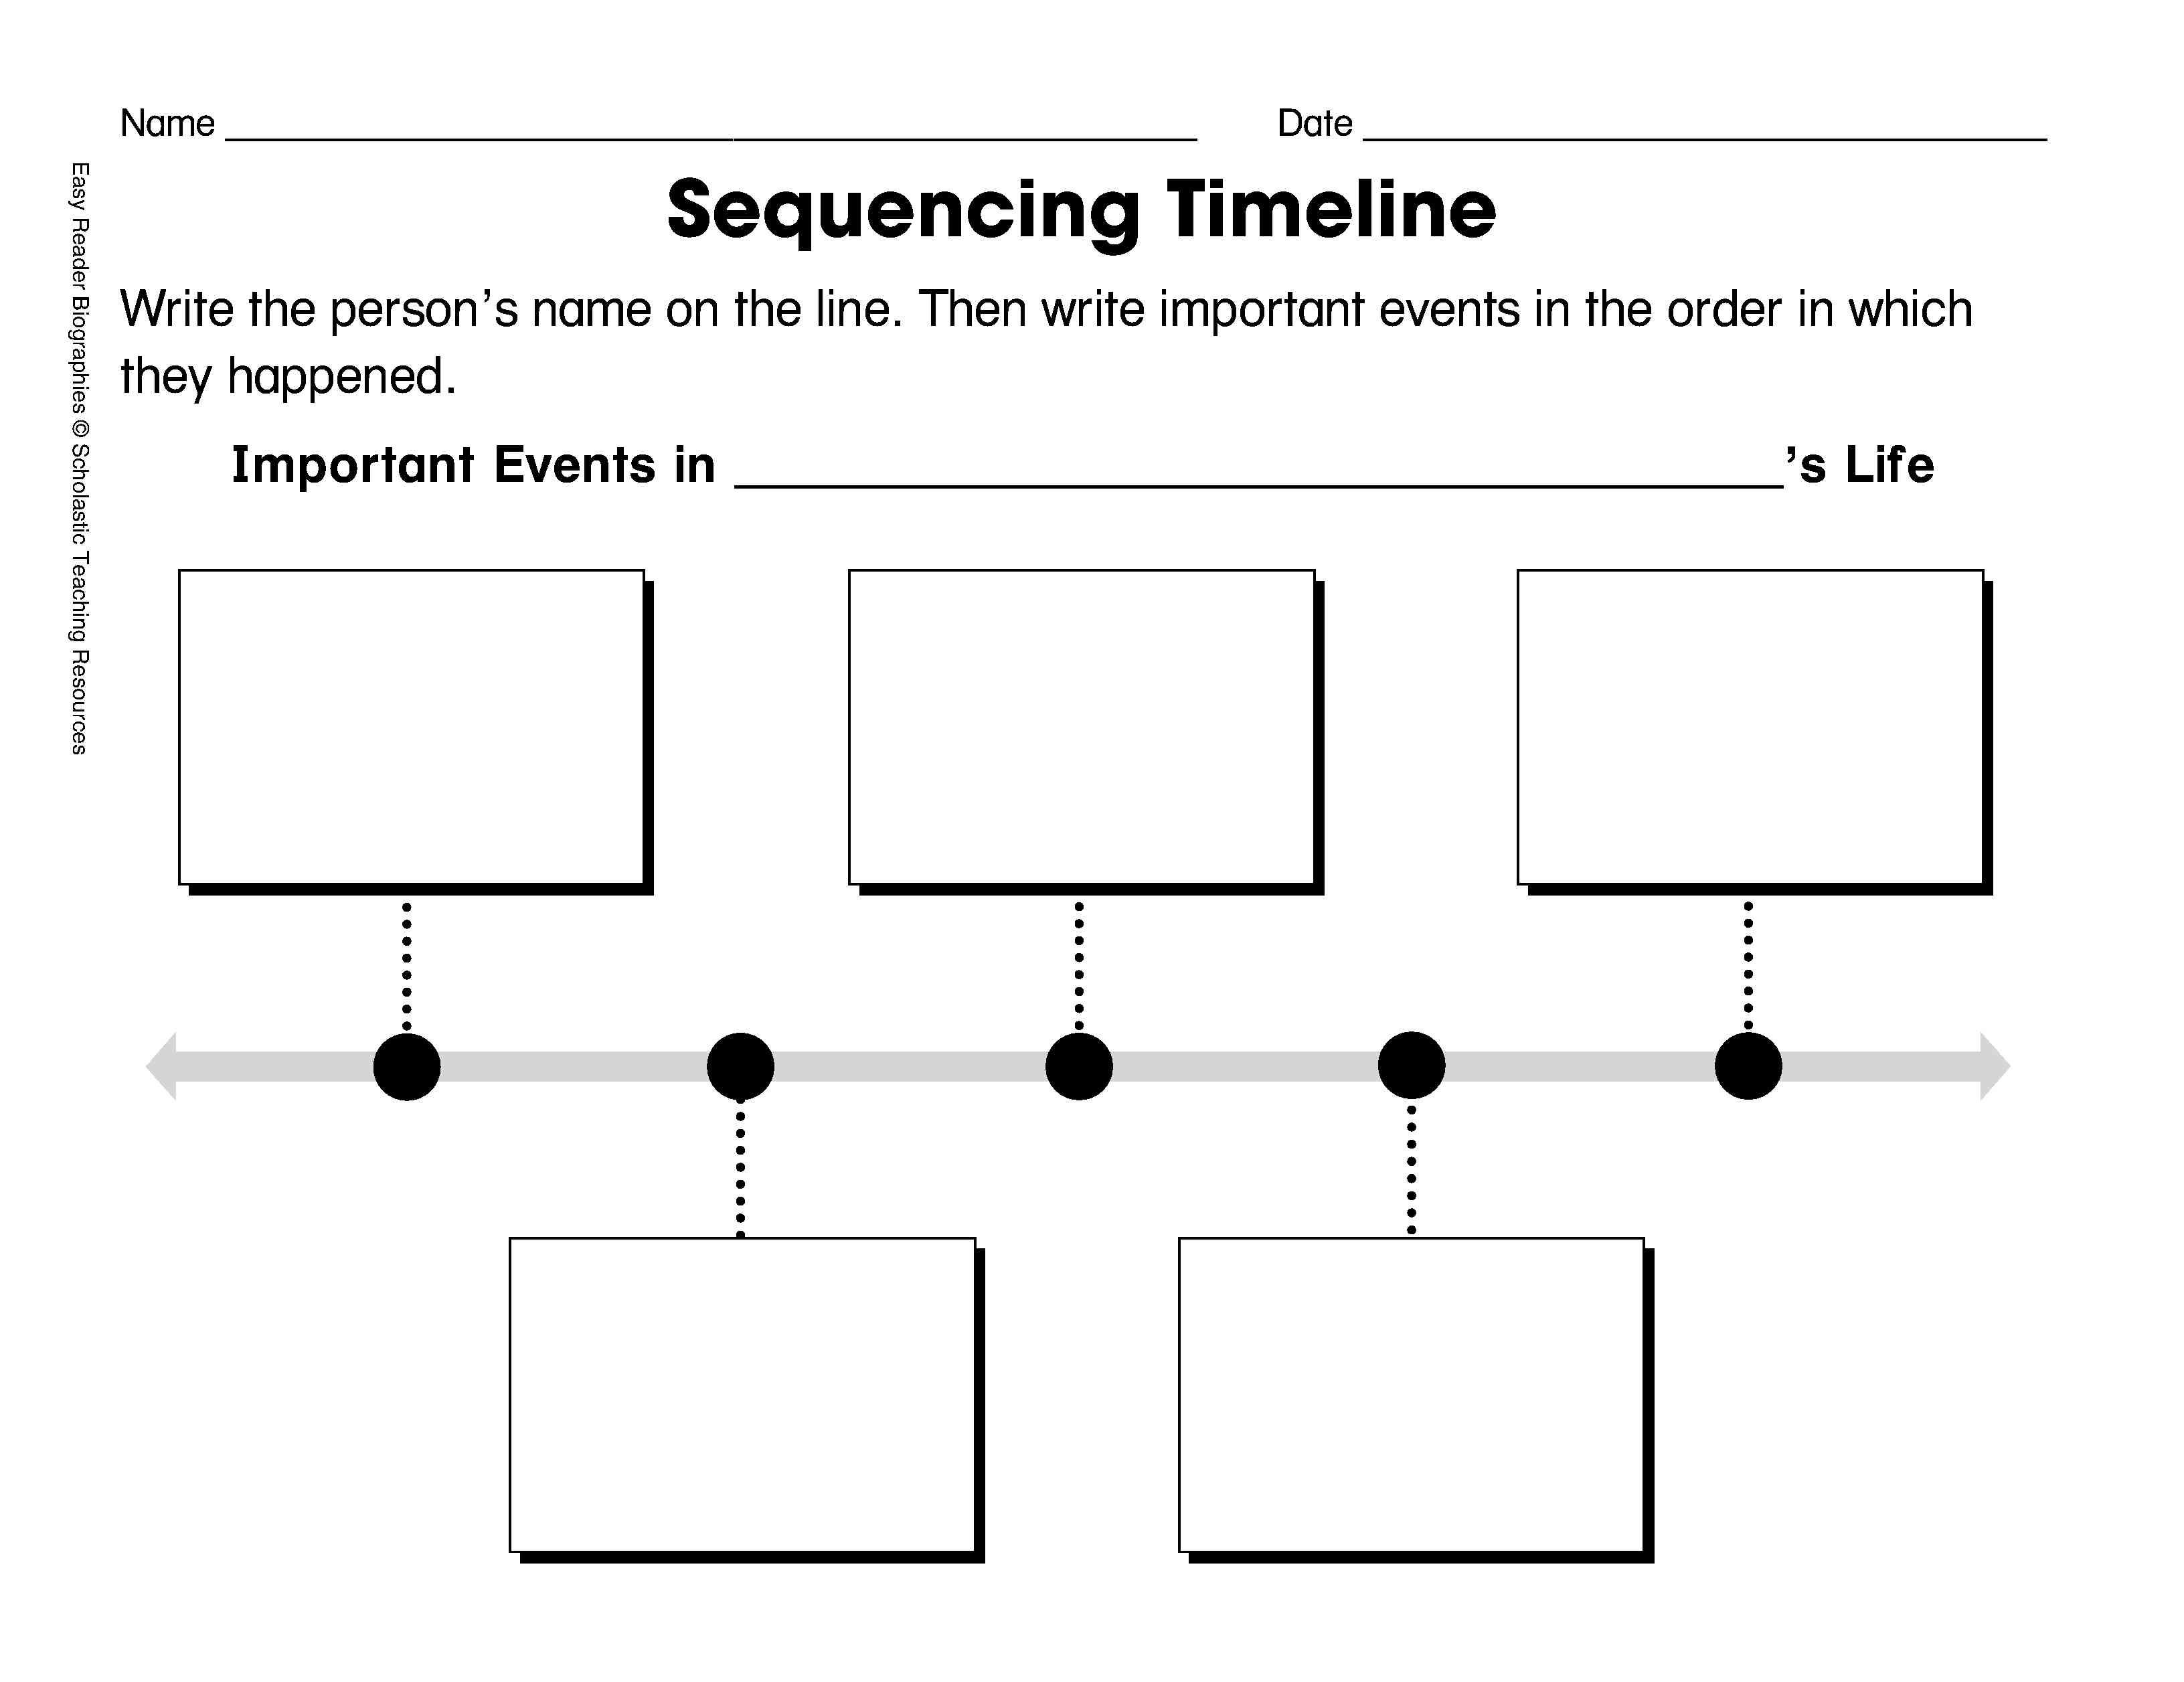 Sequencing Timeline Template: Ordering Biographical Events Free